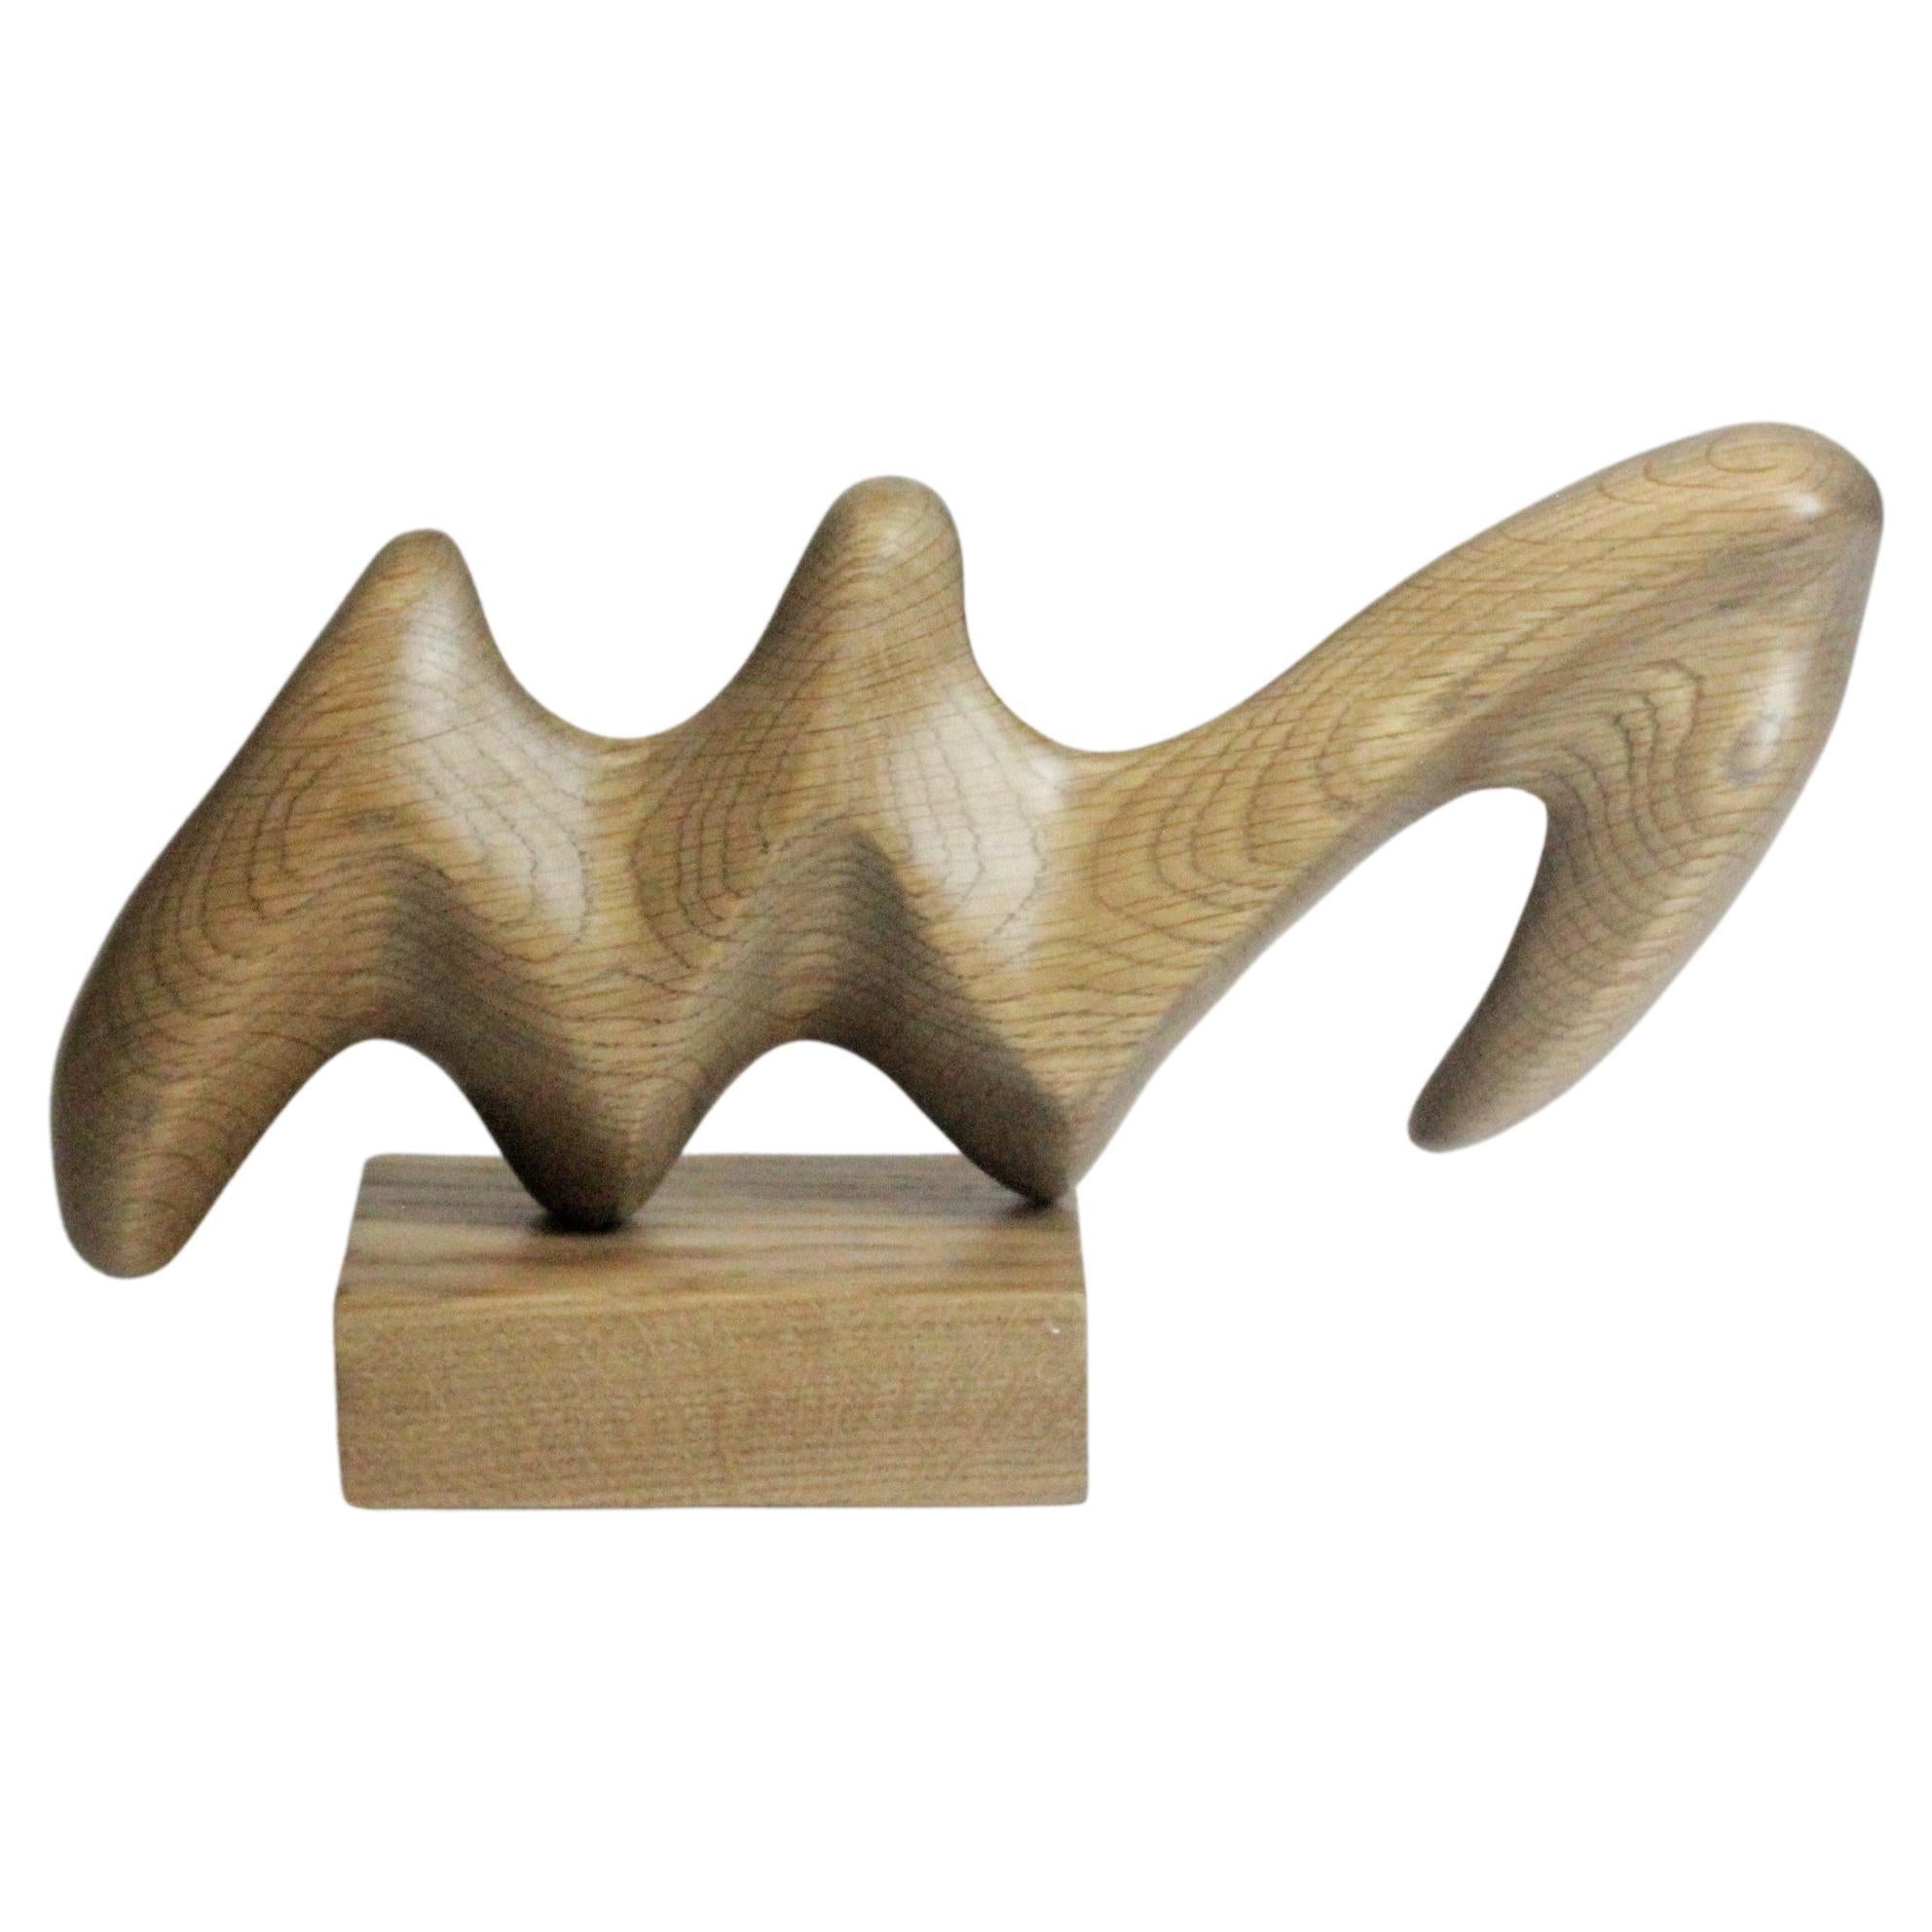 Hand Carved Biomorphic Wooden Sculpture i